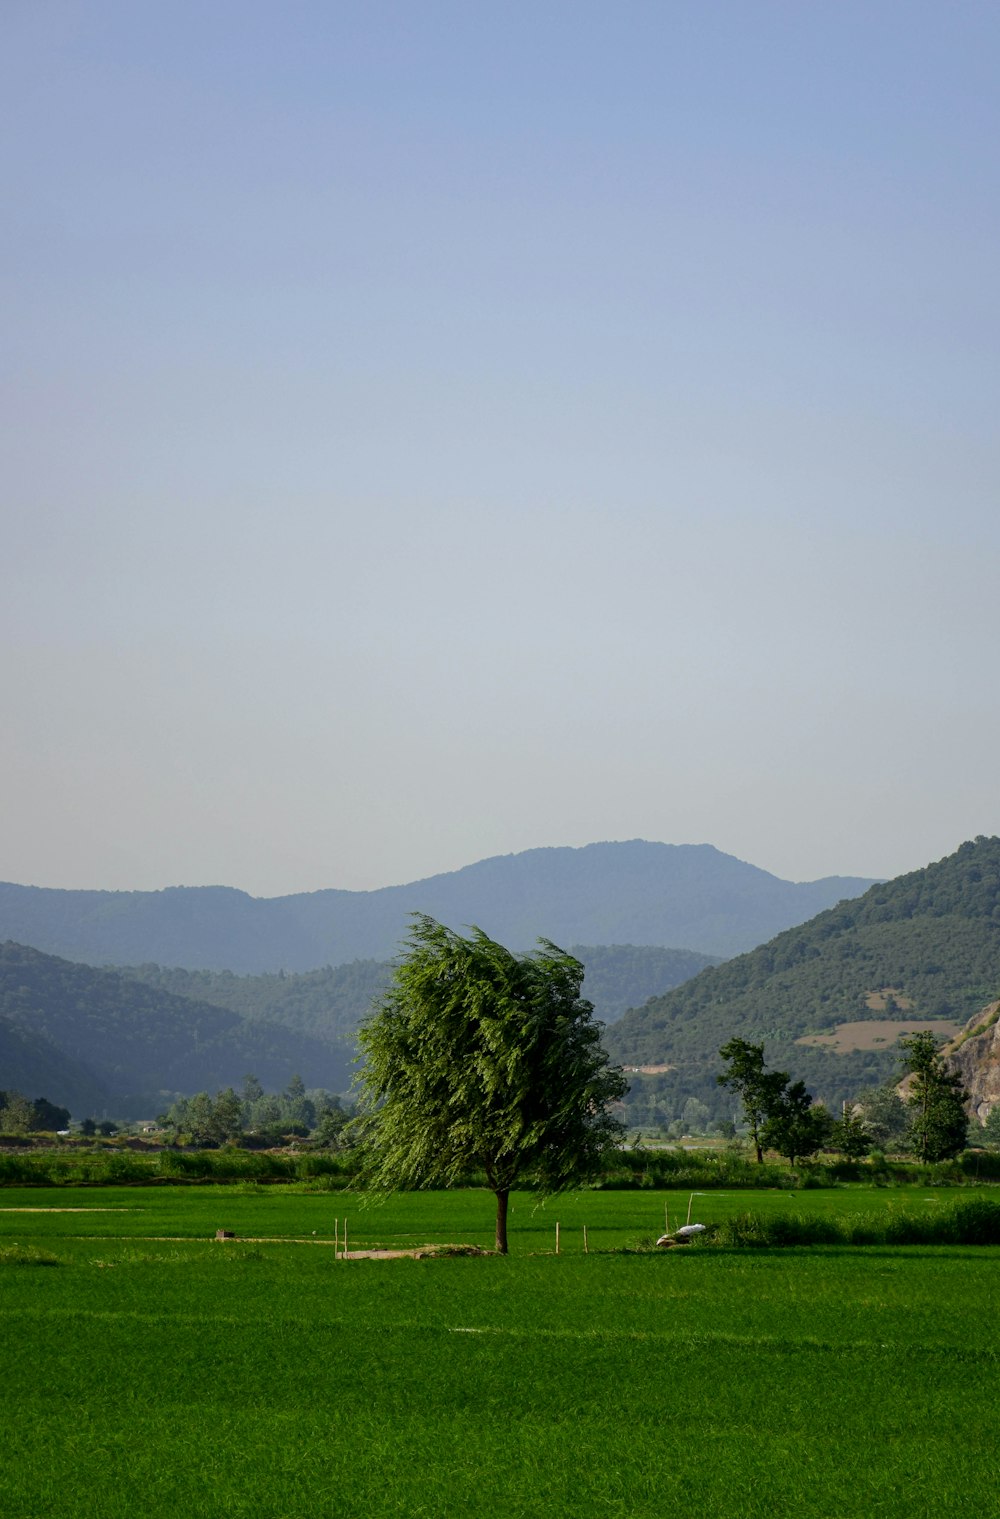 a lone tree in a green field with mountains in the background